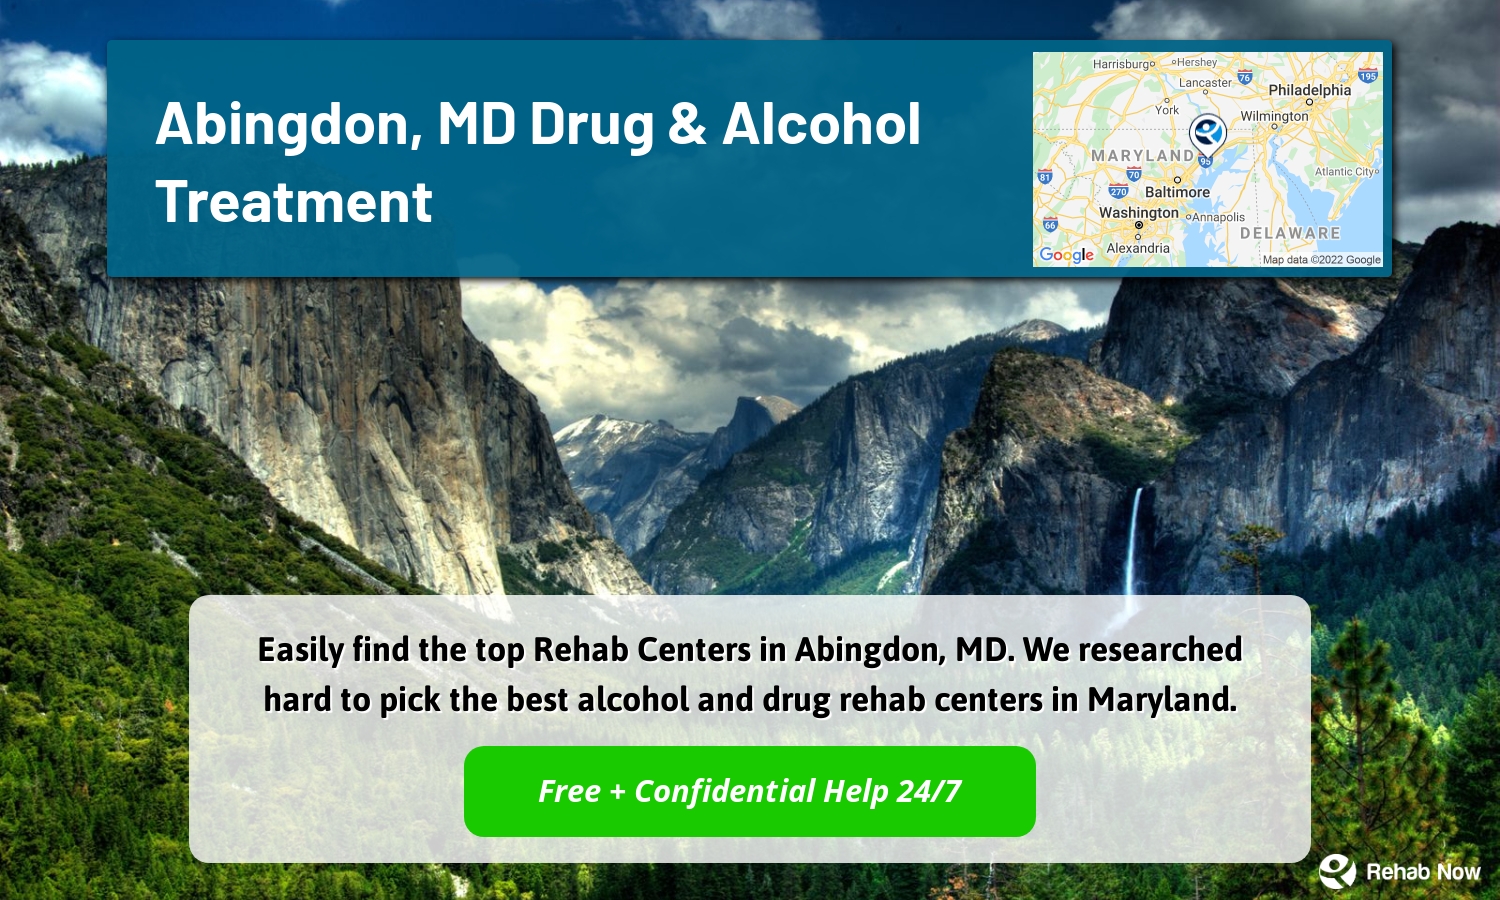 Easily find the top Rehab Centers in Abingdon, MD. We researched hard to pick the best alcohol and drug rehab centers in Maryland.